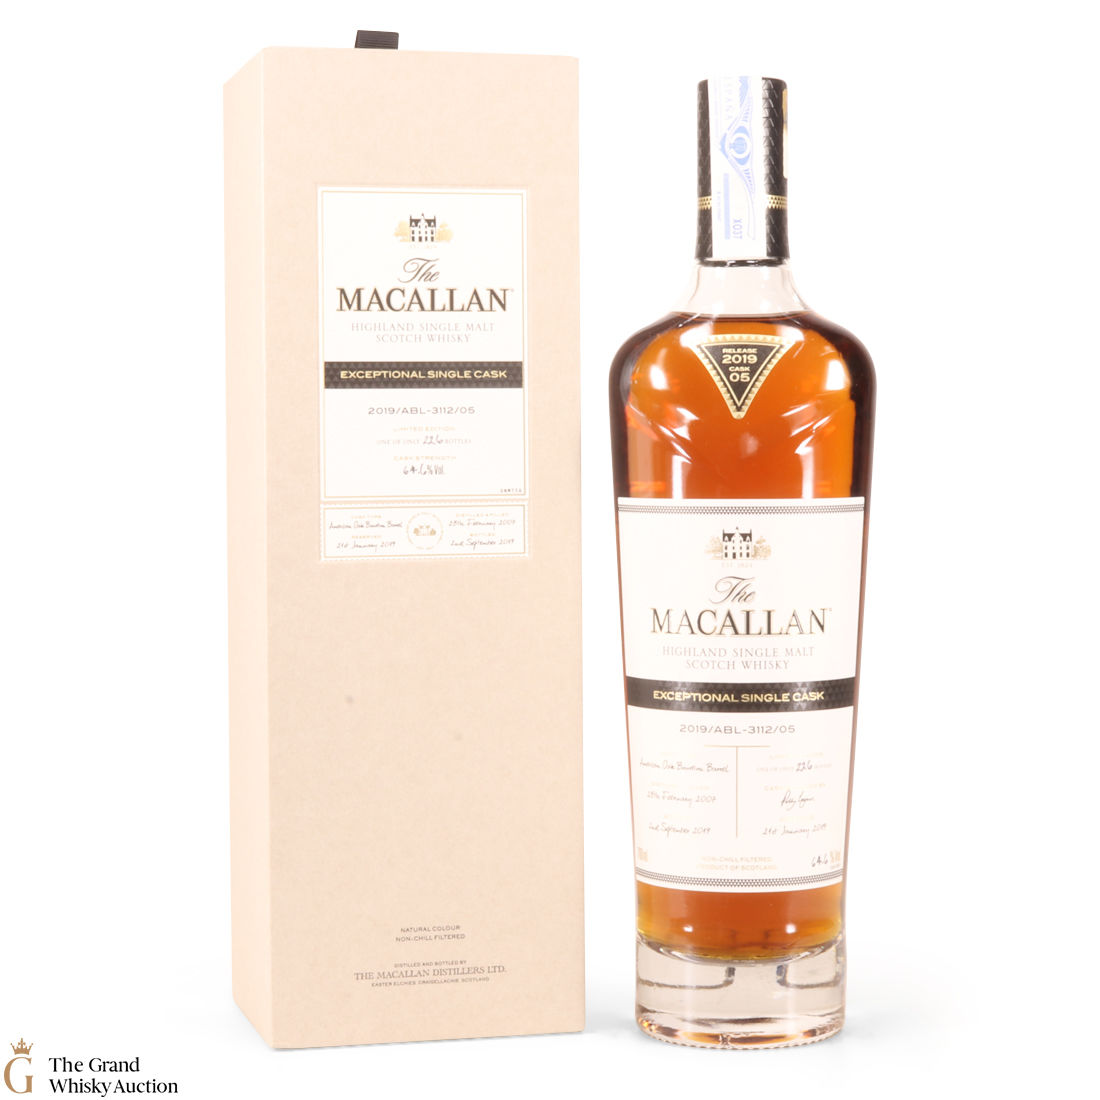 Macallan 2007 Exceptional Cask 3112 05 2019 Release Auction The Grand Whisky Auction